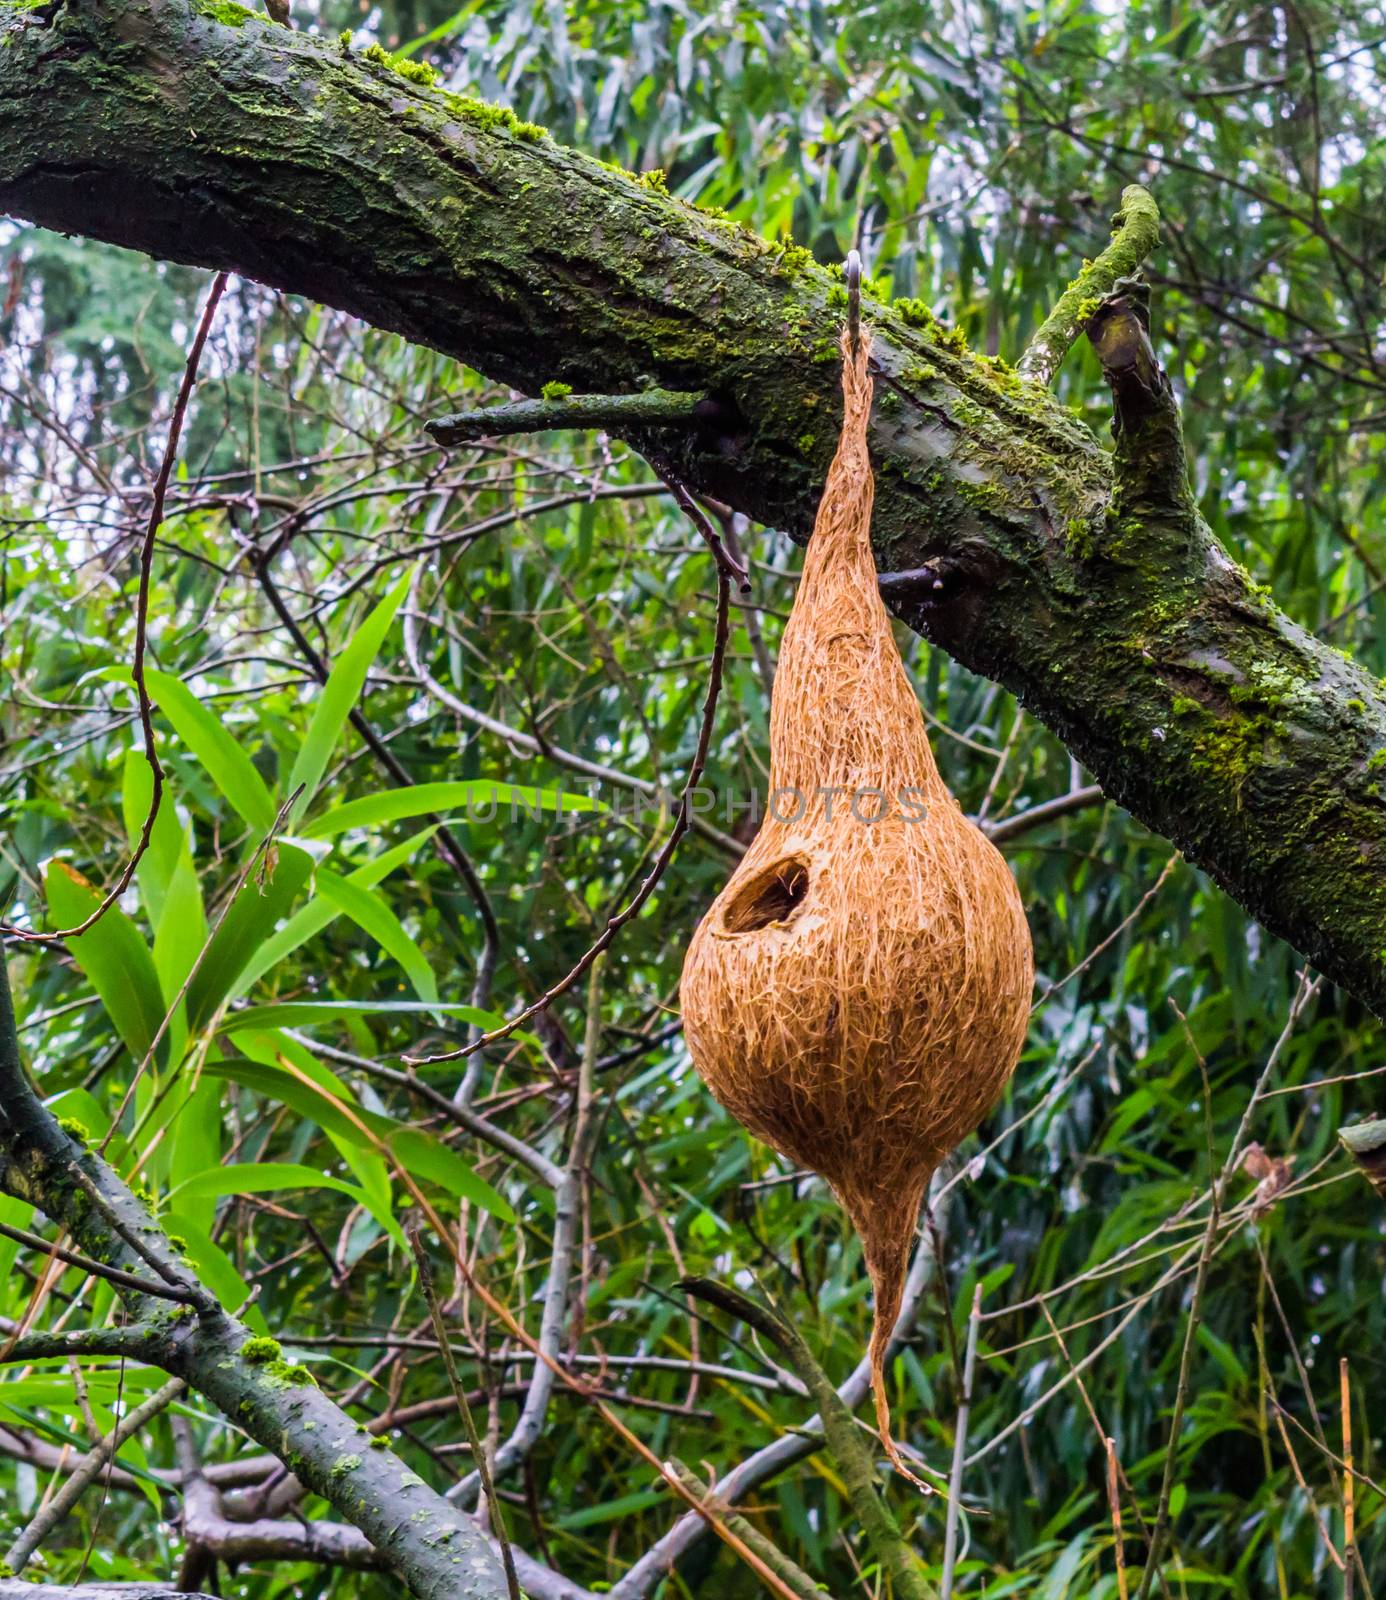 handcrafted bird house made out of a coconut, creative garden decoration by charlottebleijenberg